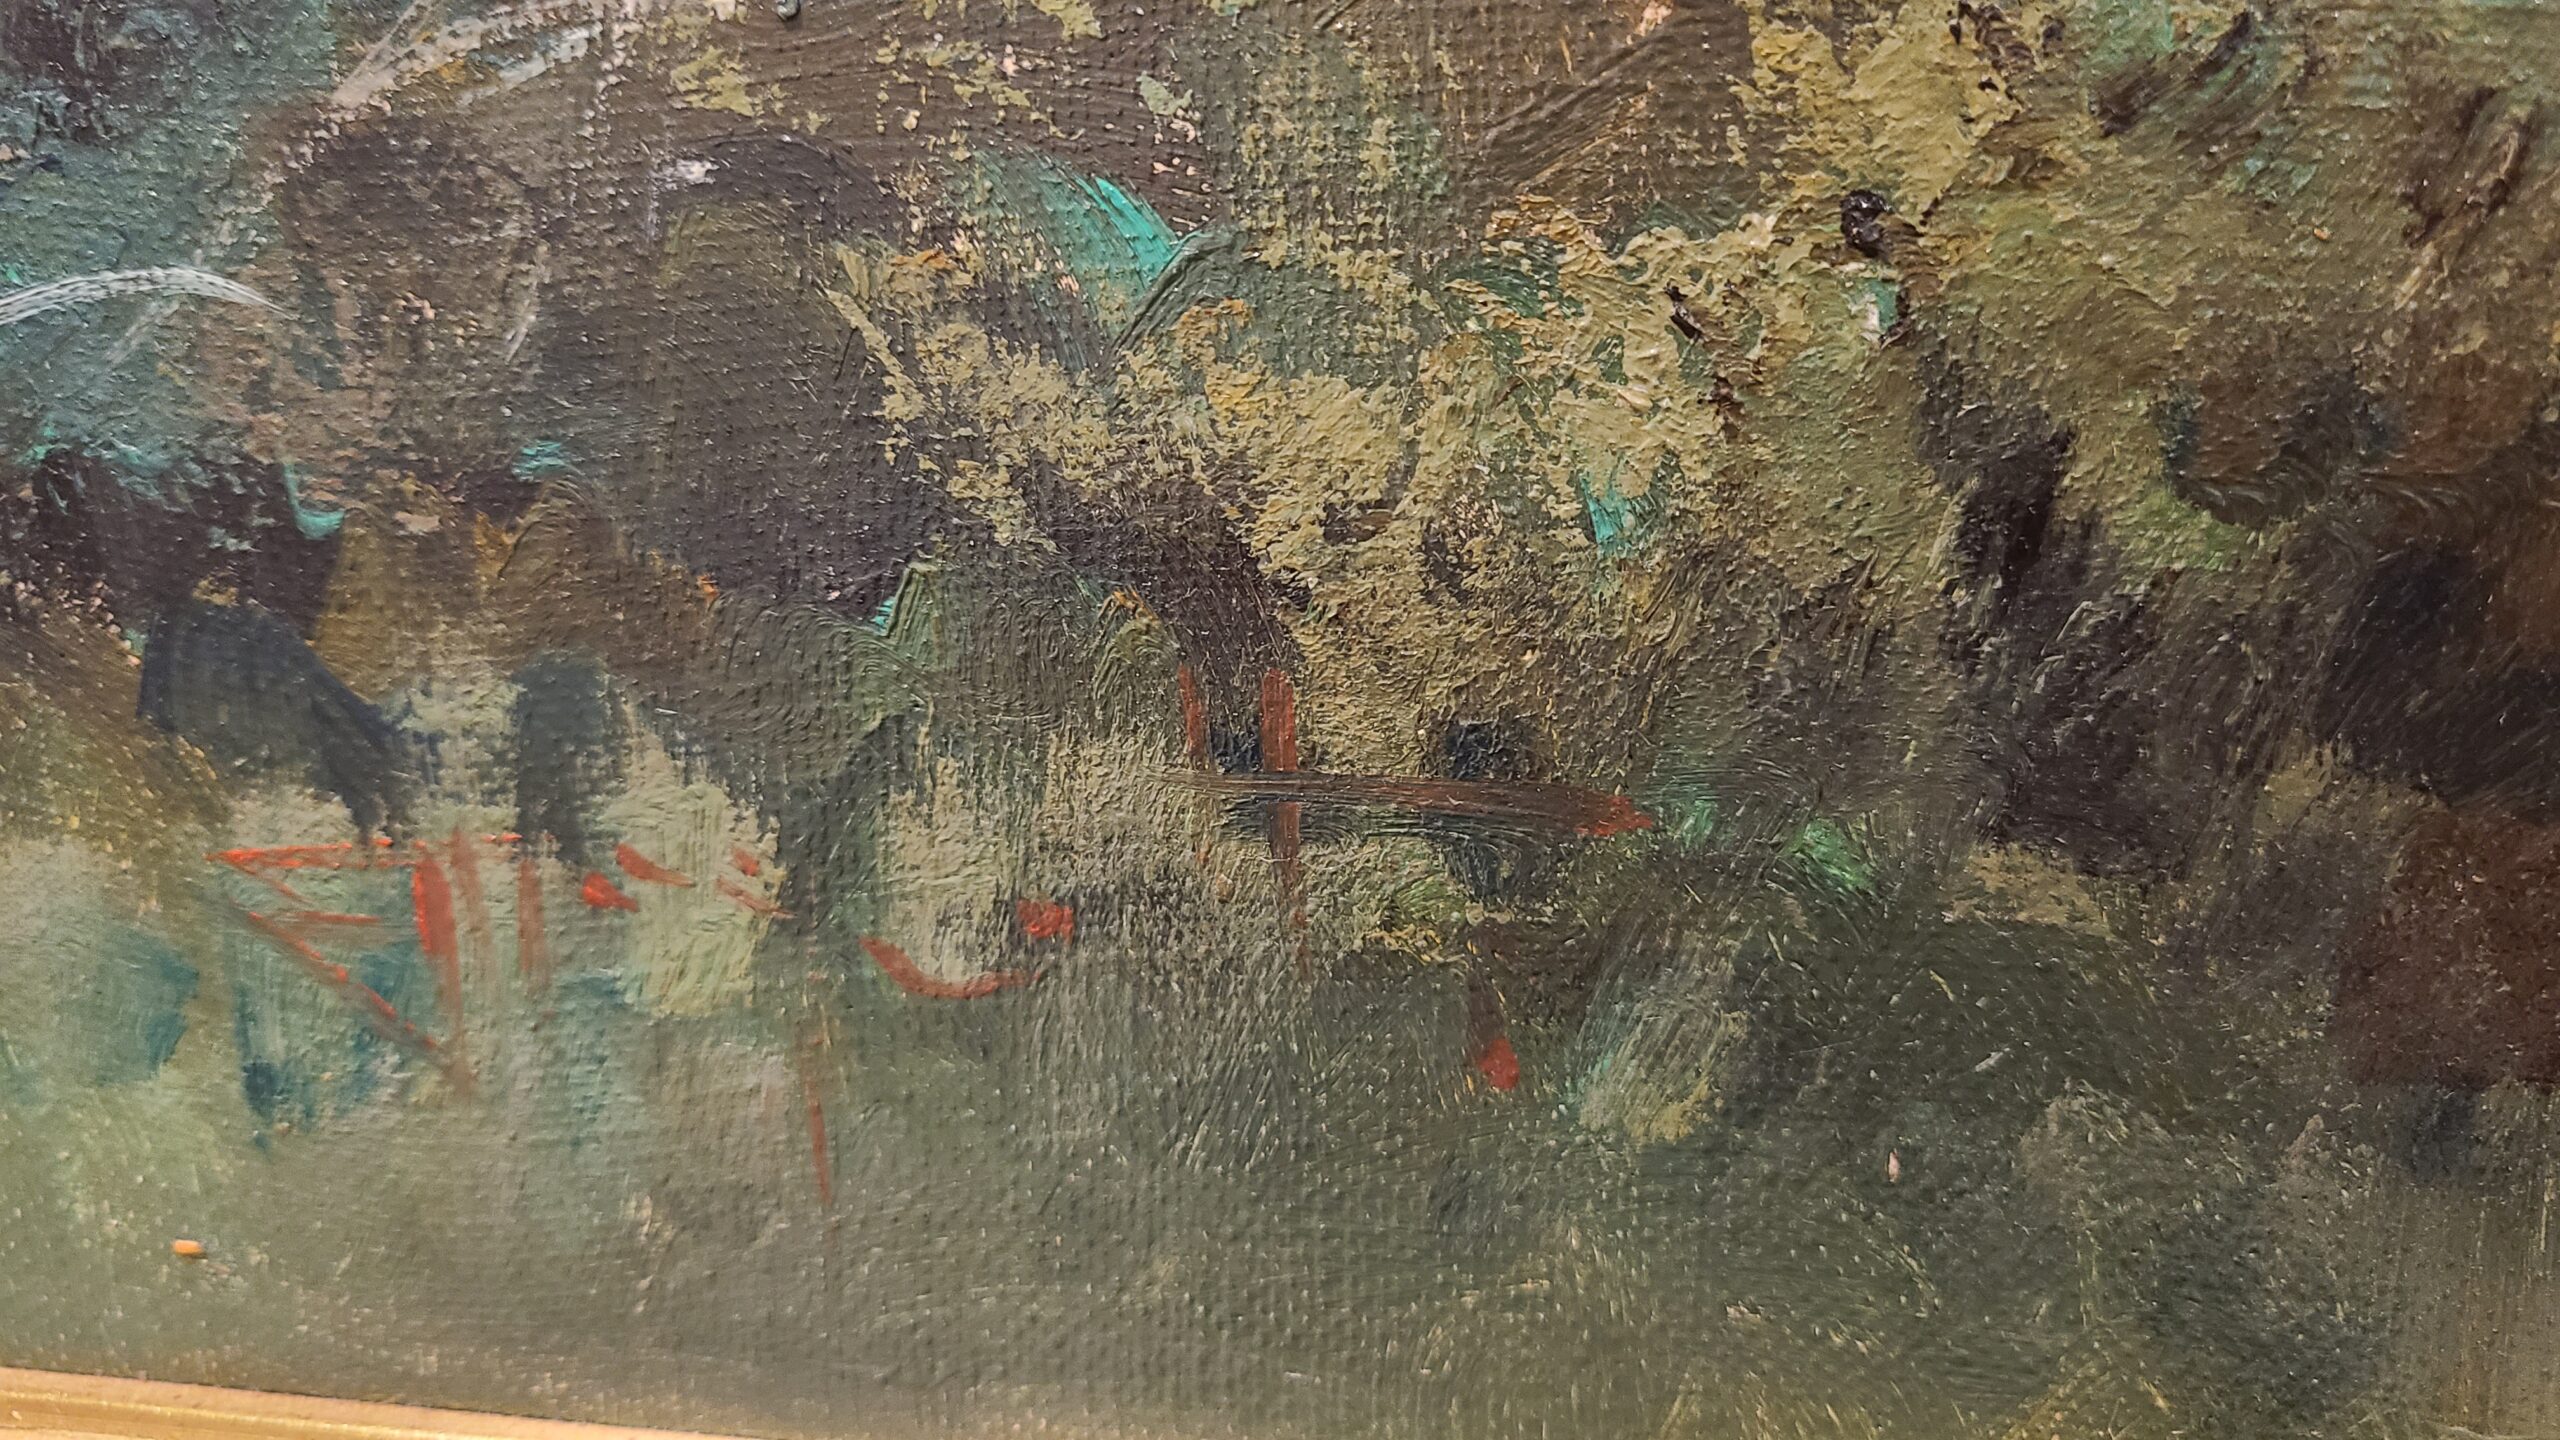 An Original Painting by Ercole Magrotti (Italian 1890 - 1958)